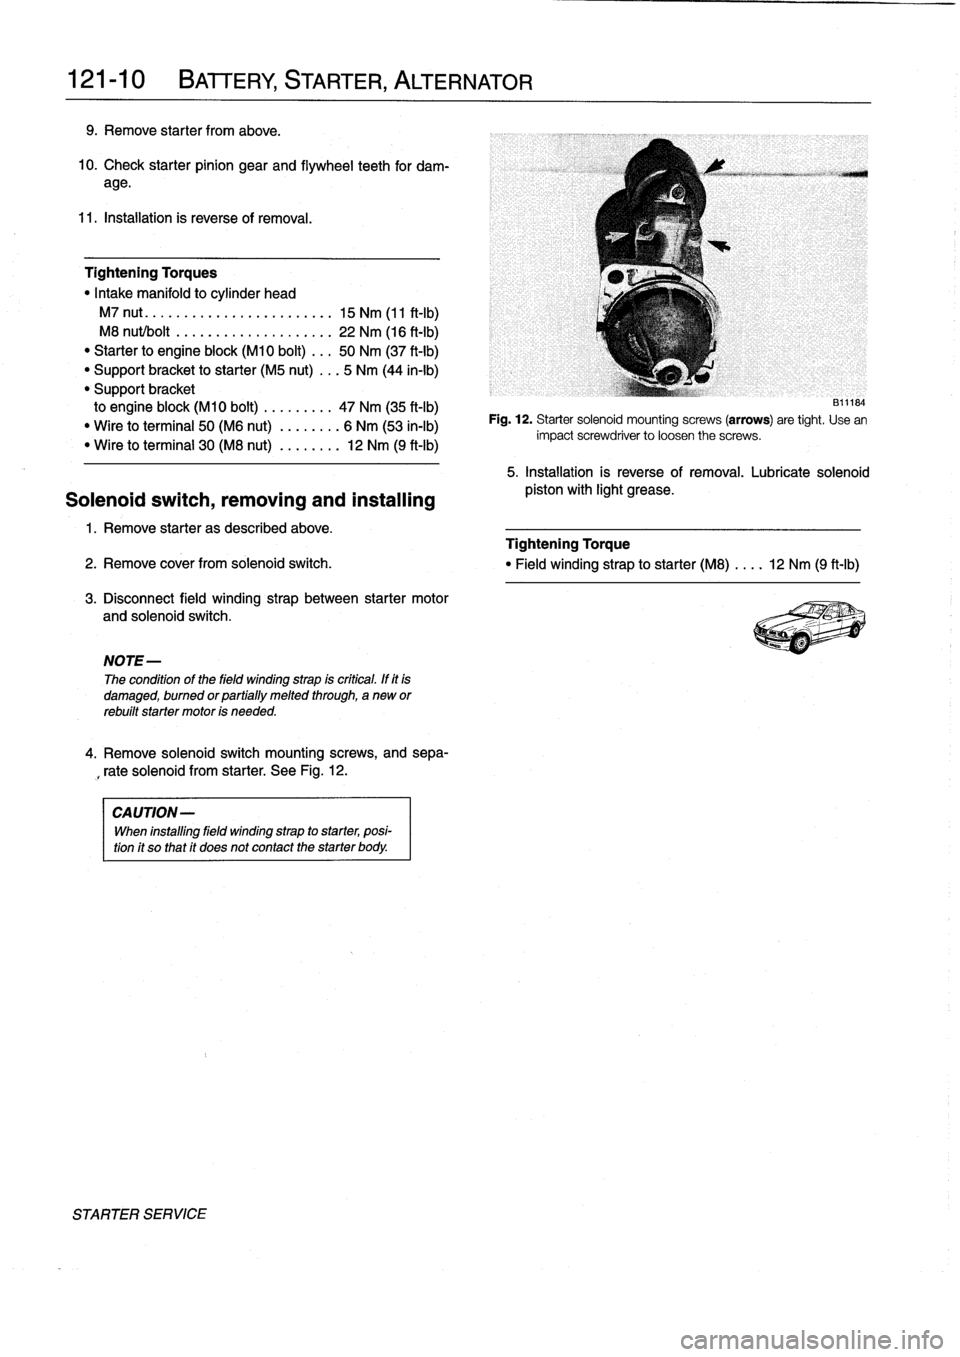 BMW 318i 1997 E36 Service Manual 
121-1
O

	

BATTERY,
STARTER,
ALTERNATOR

9
.
Remove
starter
from
above
.

10
.
Check
starter
pinion
gear
and
flywheel
teeth
for
dam-
age
.

11
.
Installation
is
reverse
of
removal
.

Tightening
Torq